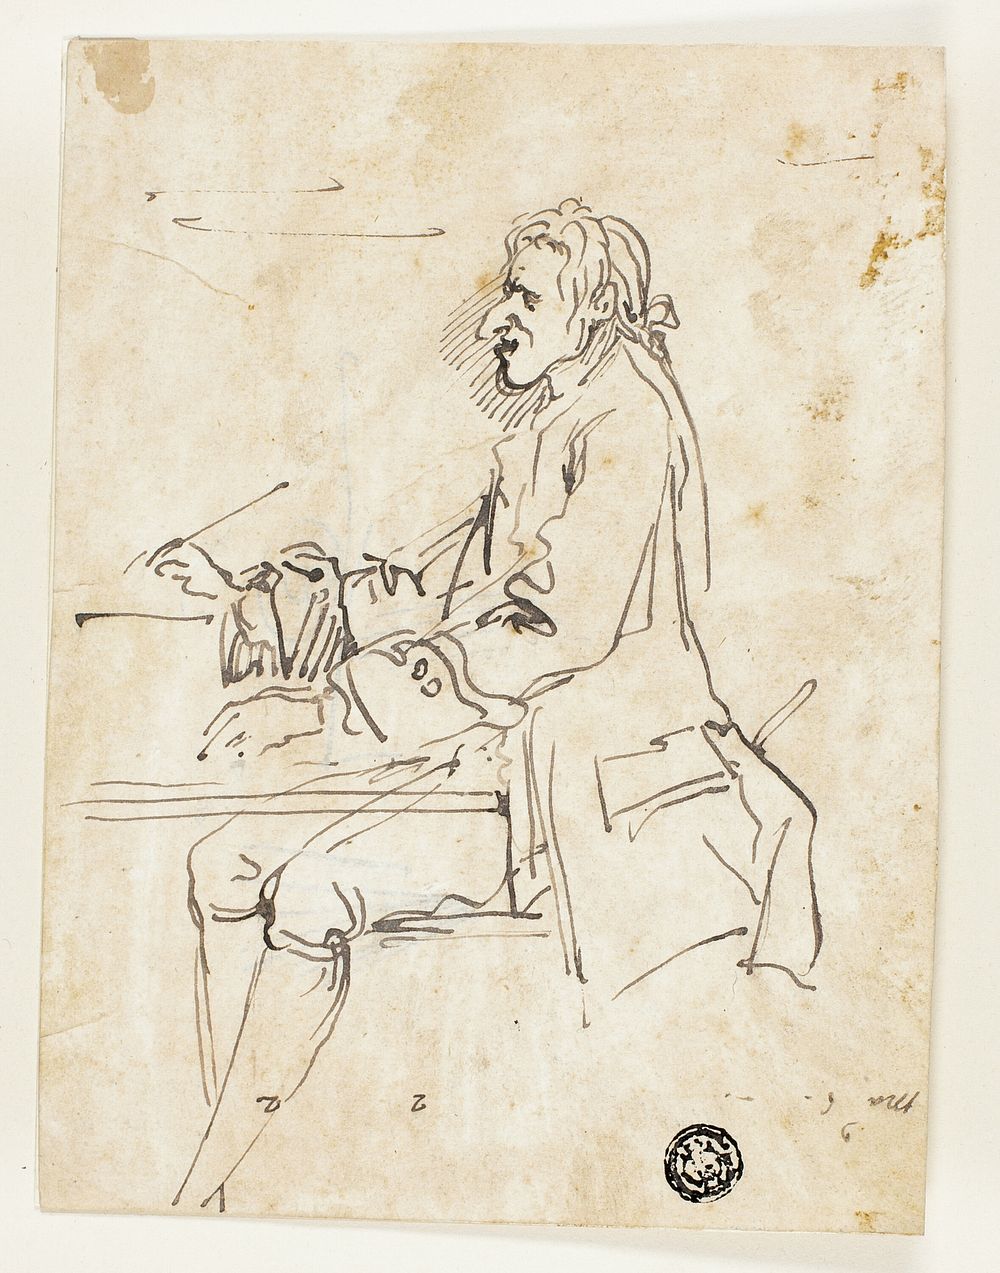 Caricature of Man Writing by Carlo Marchionni